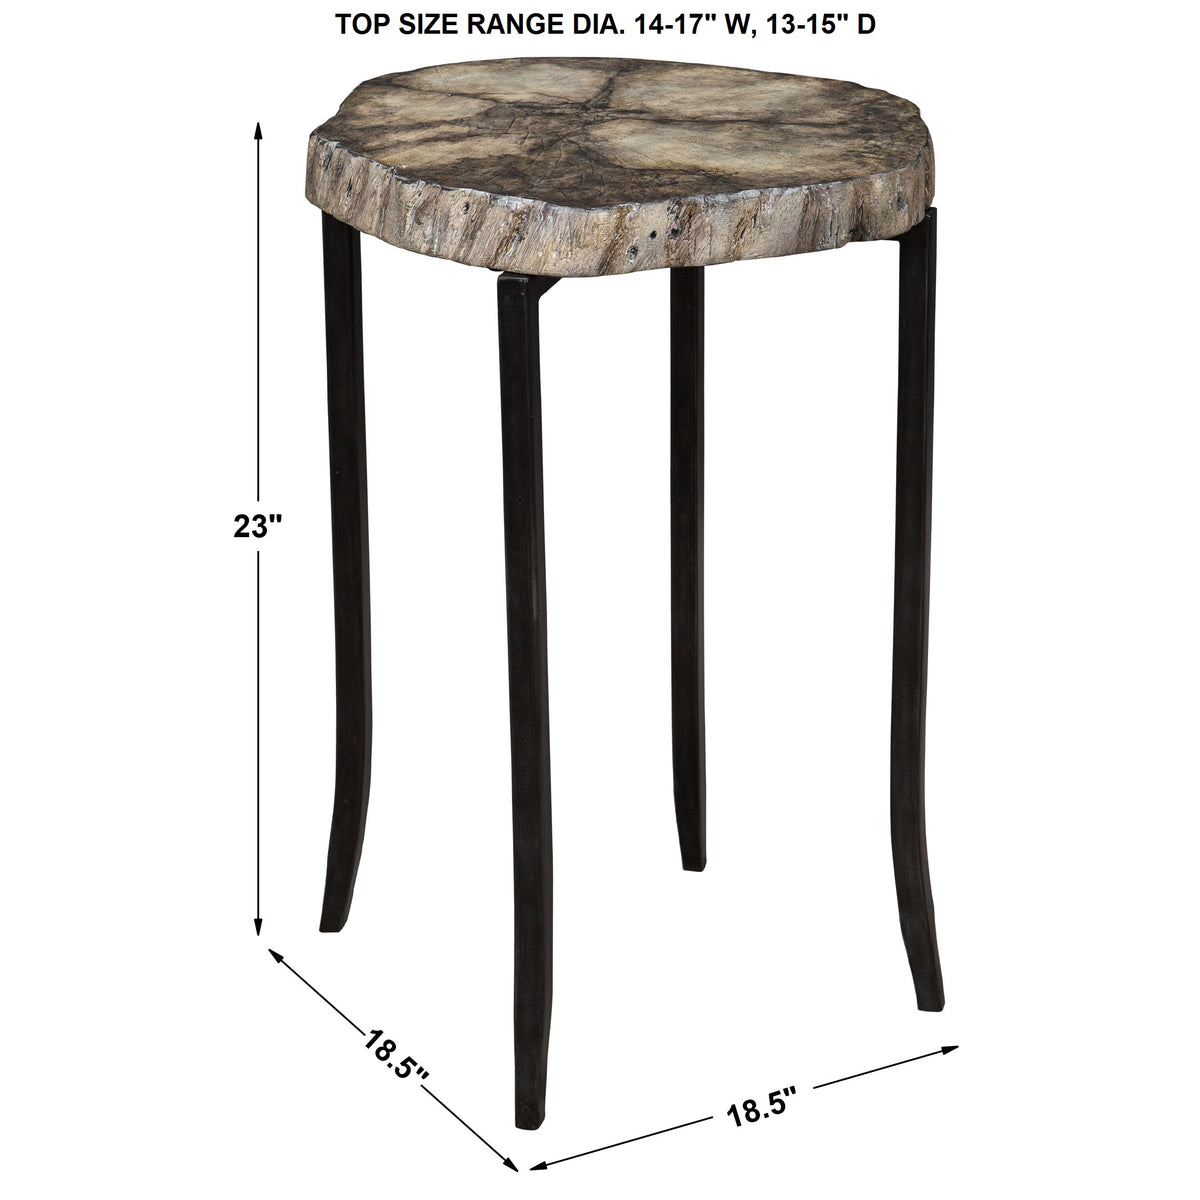 Uttermost Stiles Rustic Accent Table